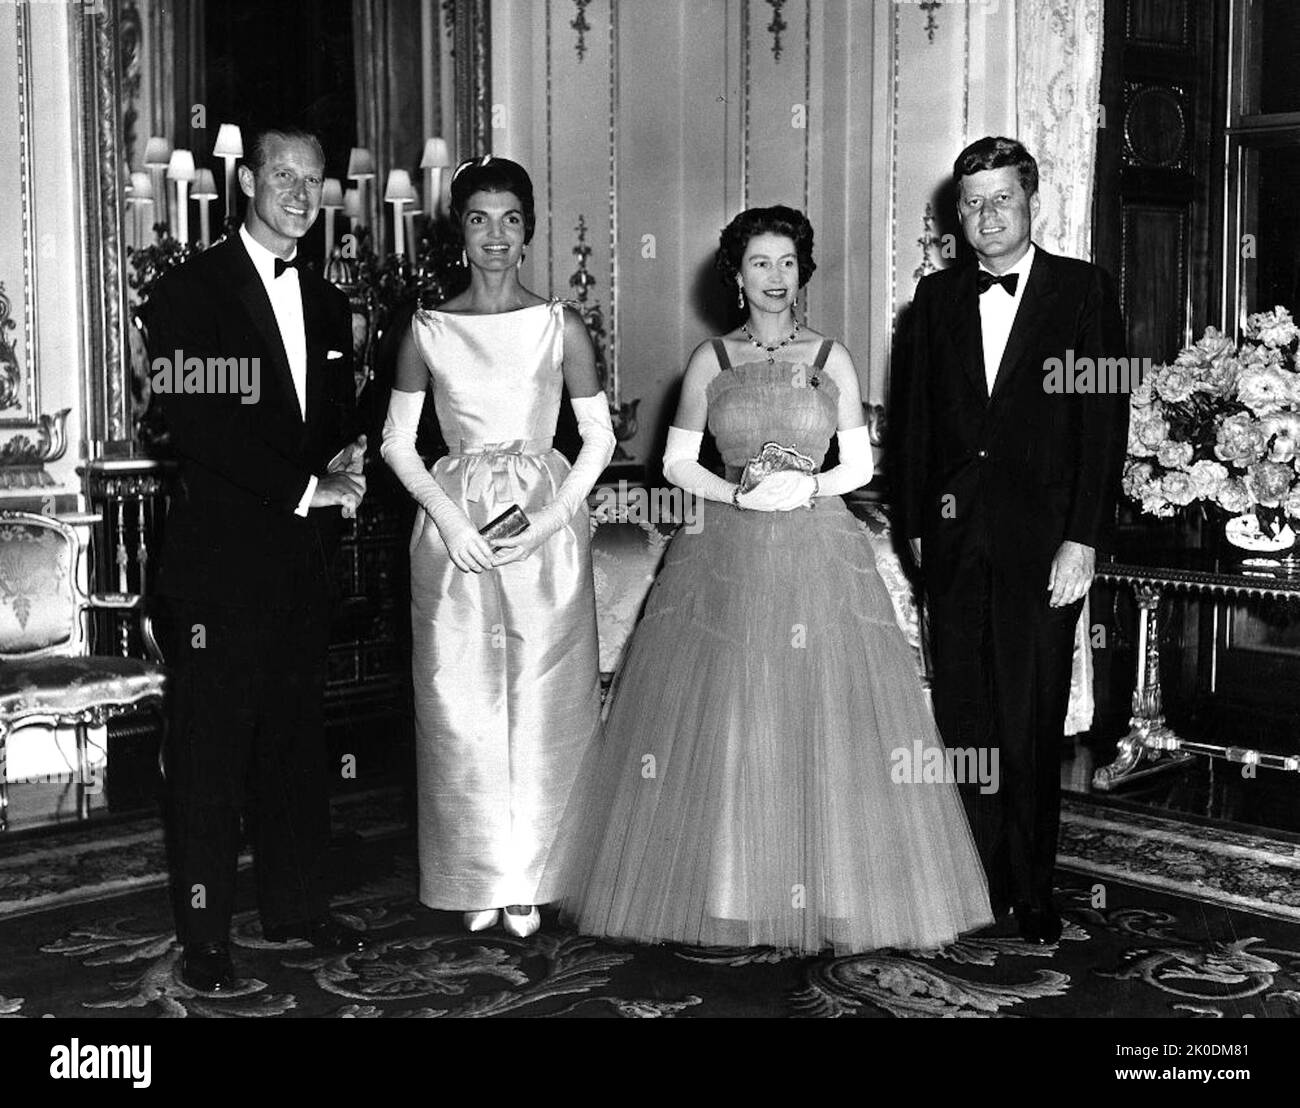 PX 96-33:17  05 June 1961  Buckingham Palace  Queen Elizabeth and Prince Philip host Queen's Dinner for President and Mrs. Kennedy. U. S. Department o Stock Photo